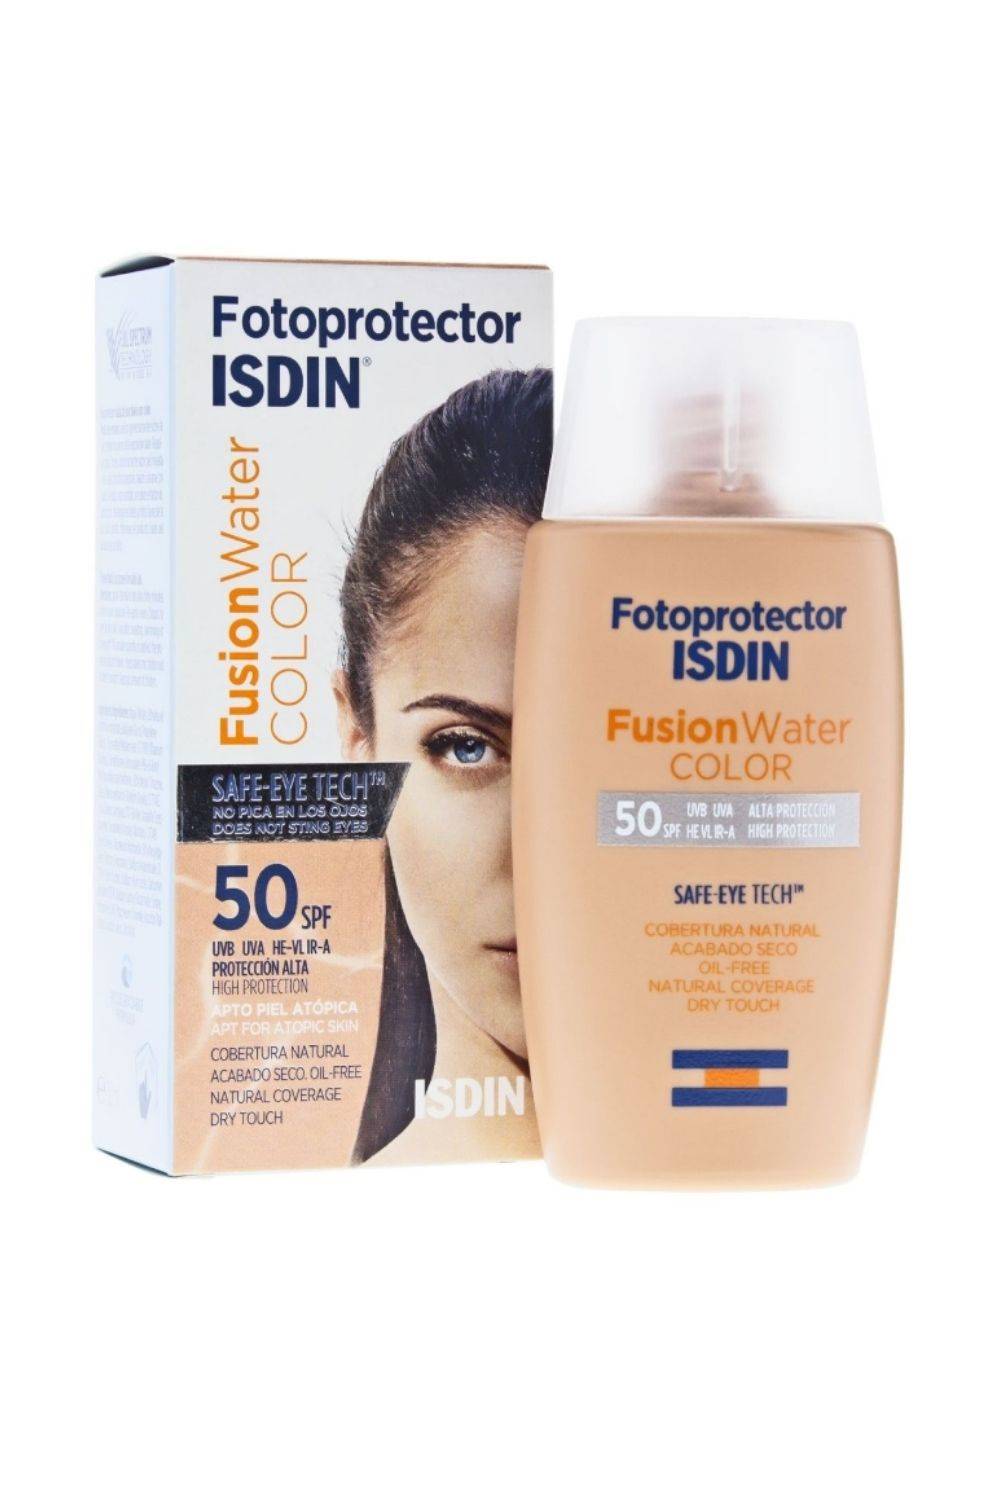 ISDIN® Fotoprotector Fusion Water Color